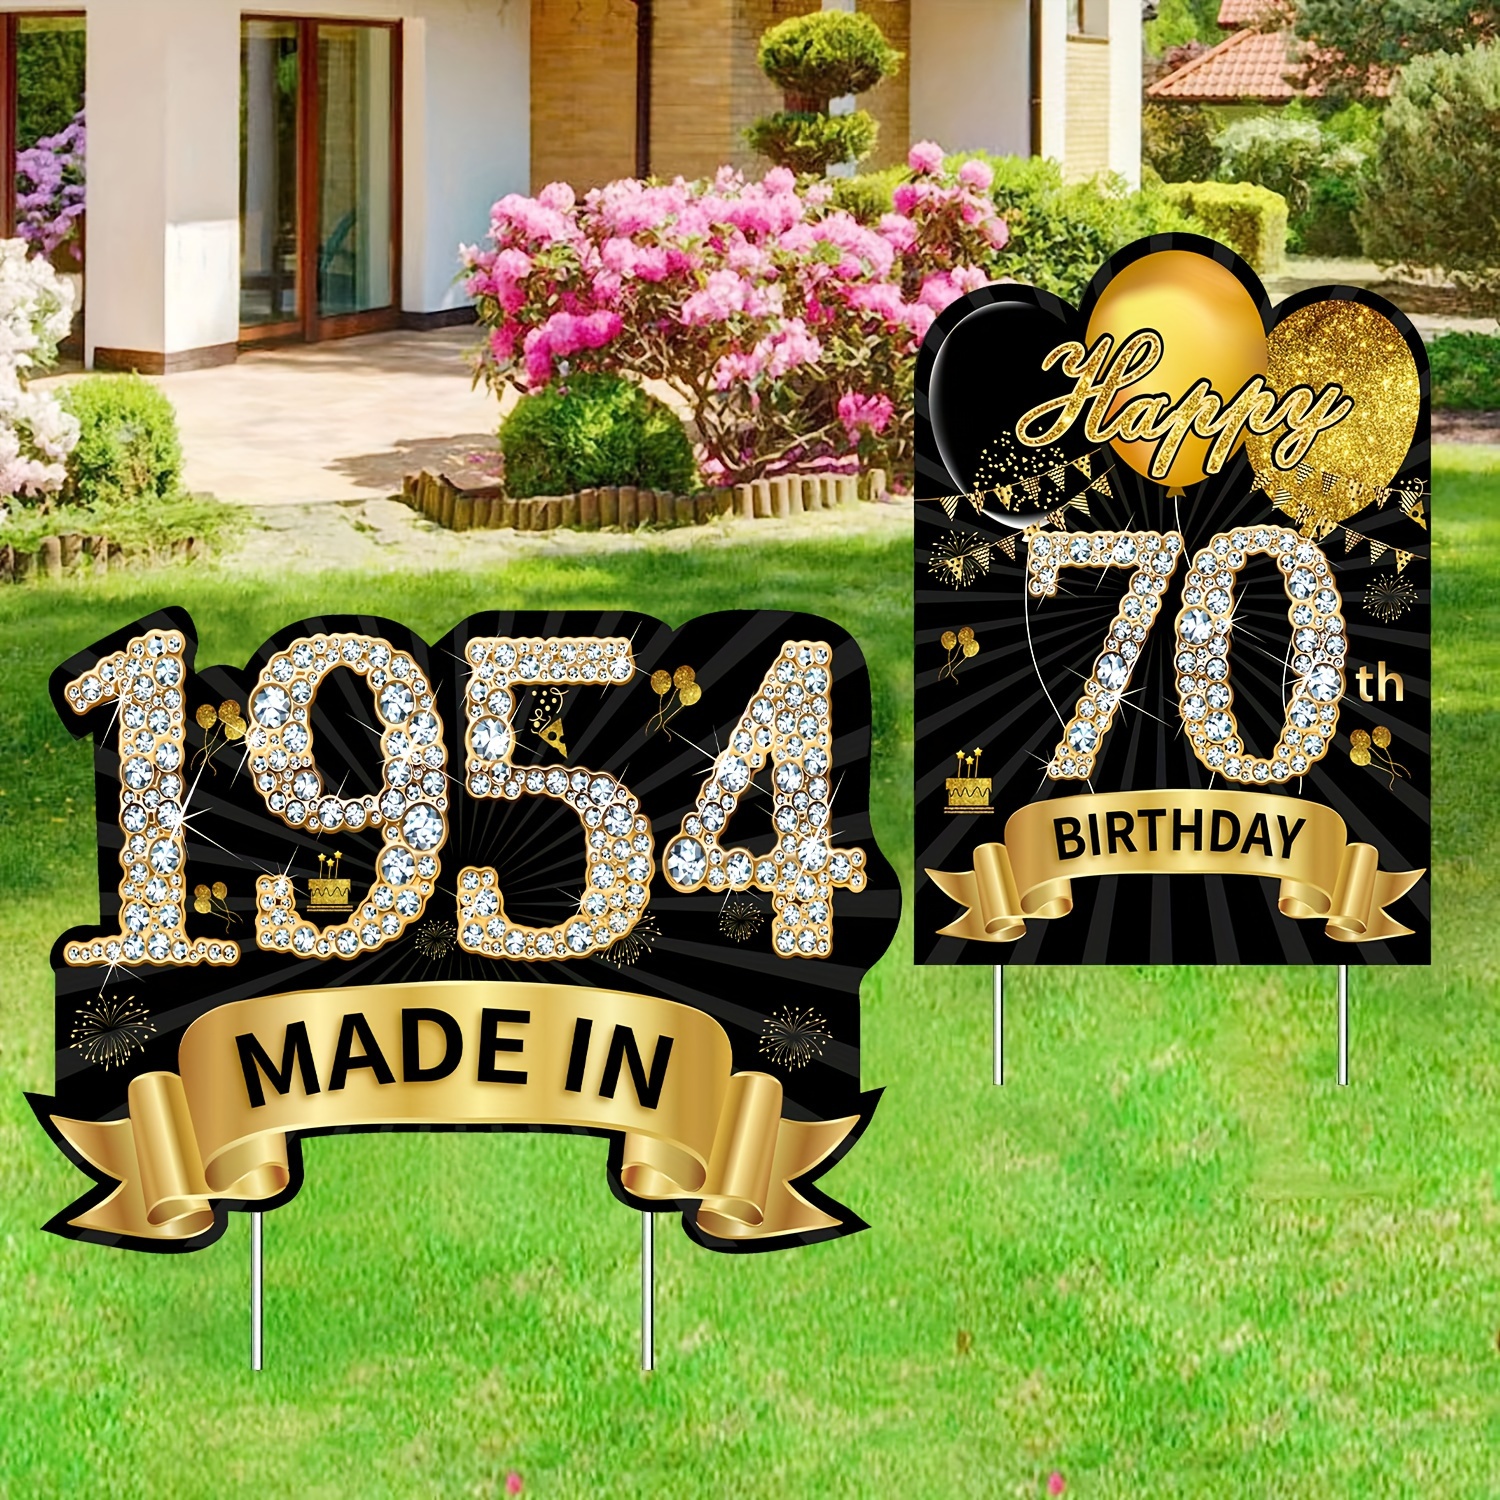 

2pcs Festive Black Golden 70th Birthday Yard Signs, Made In 1954, Classic Happy Seventy Outdoor Lawn Decorations, Durable Plastic Party Supplies With Stakes For Men & Women